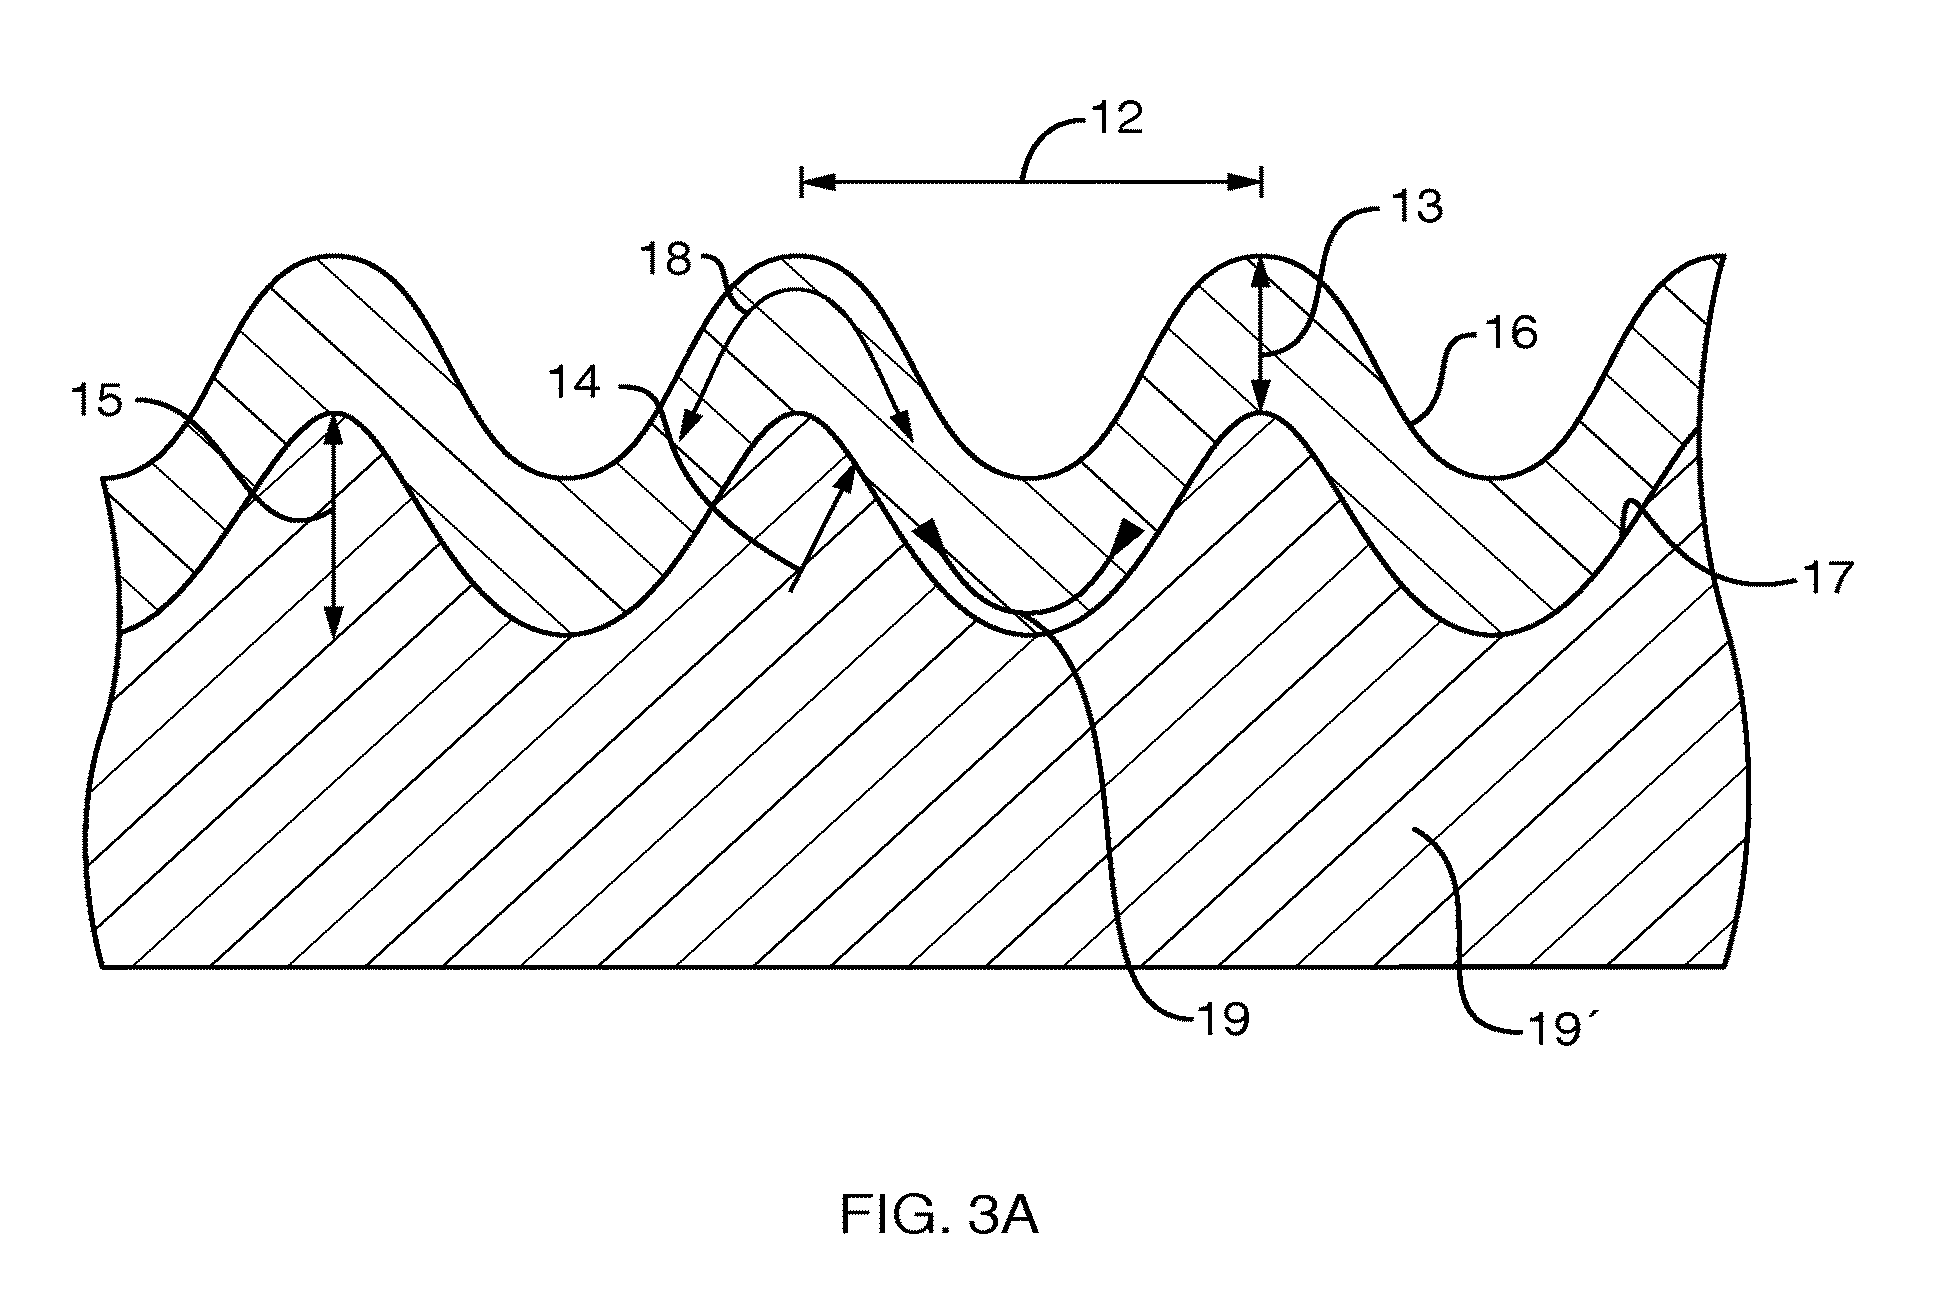 Stress-induced bandgap-shifted semiconductor photoelectrolytic/photocatalytic/photovoltaic surface and method for making same